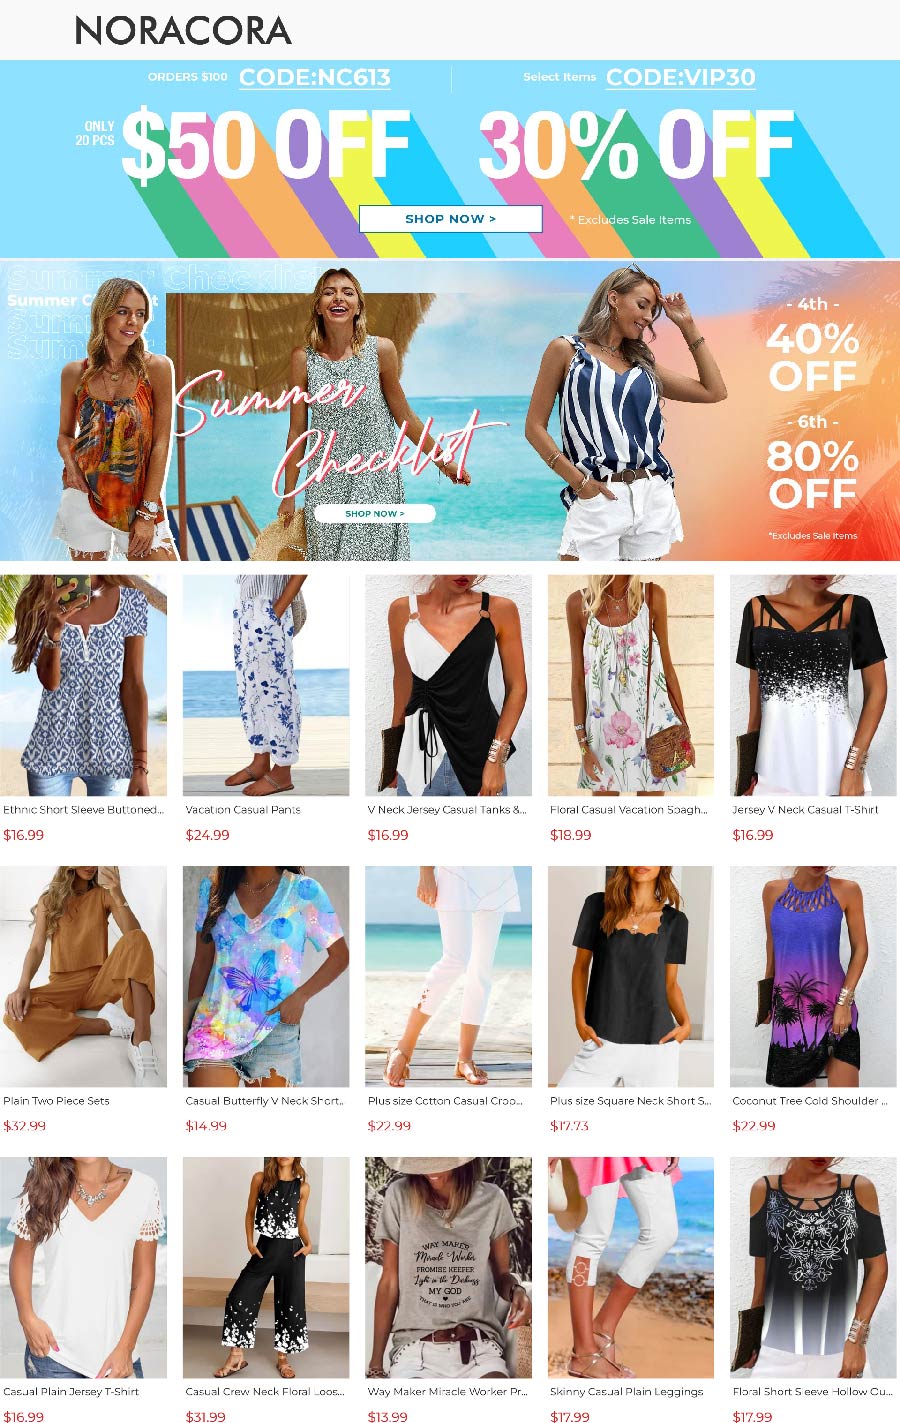 Noracora stores Coupon  Extra 15% off & more today at Noracora via promo code EM15 #noracora 